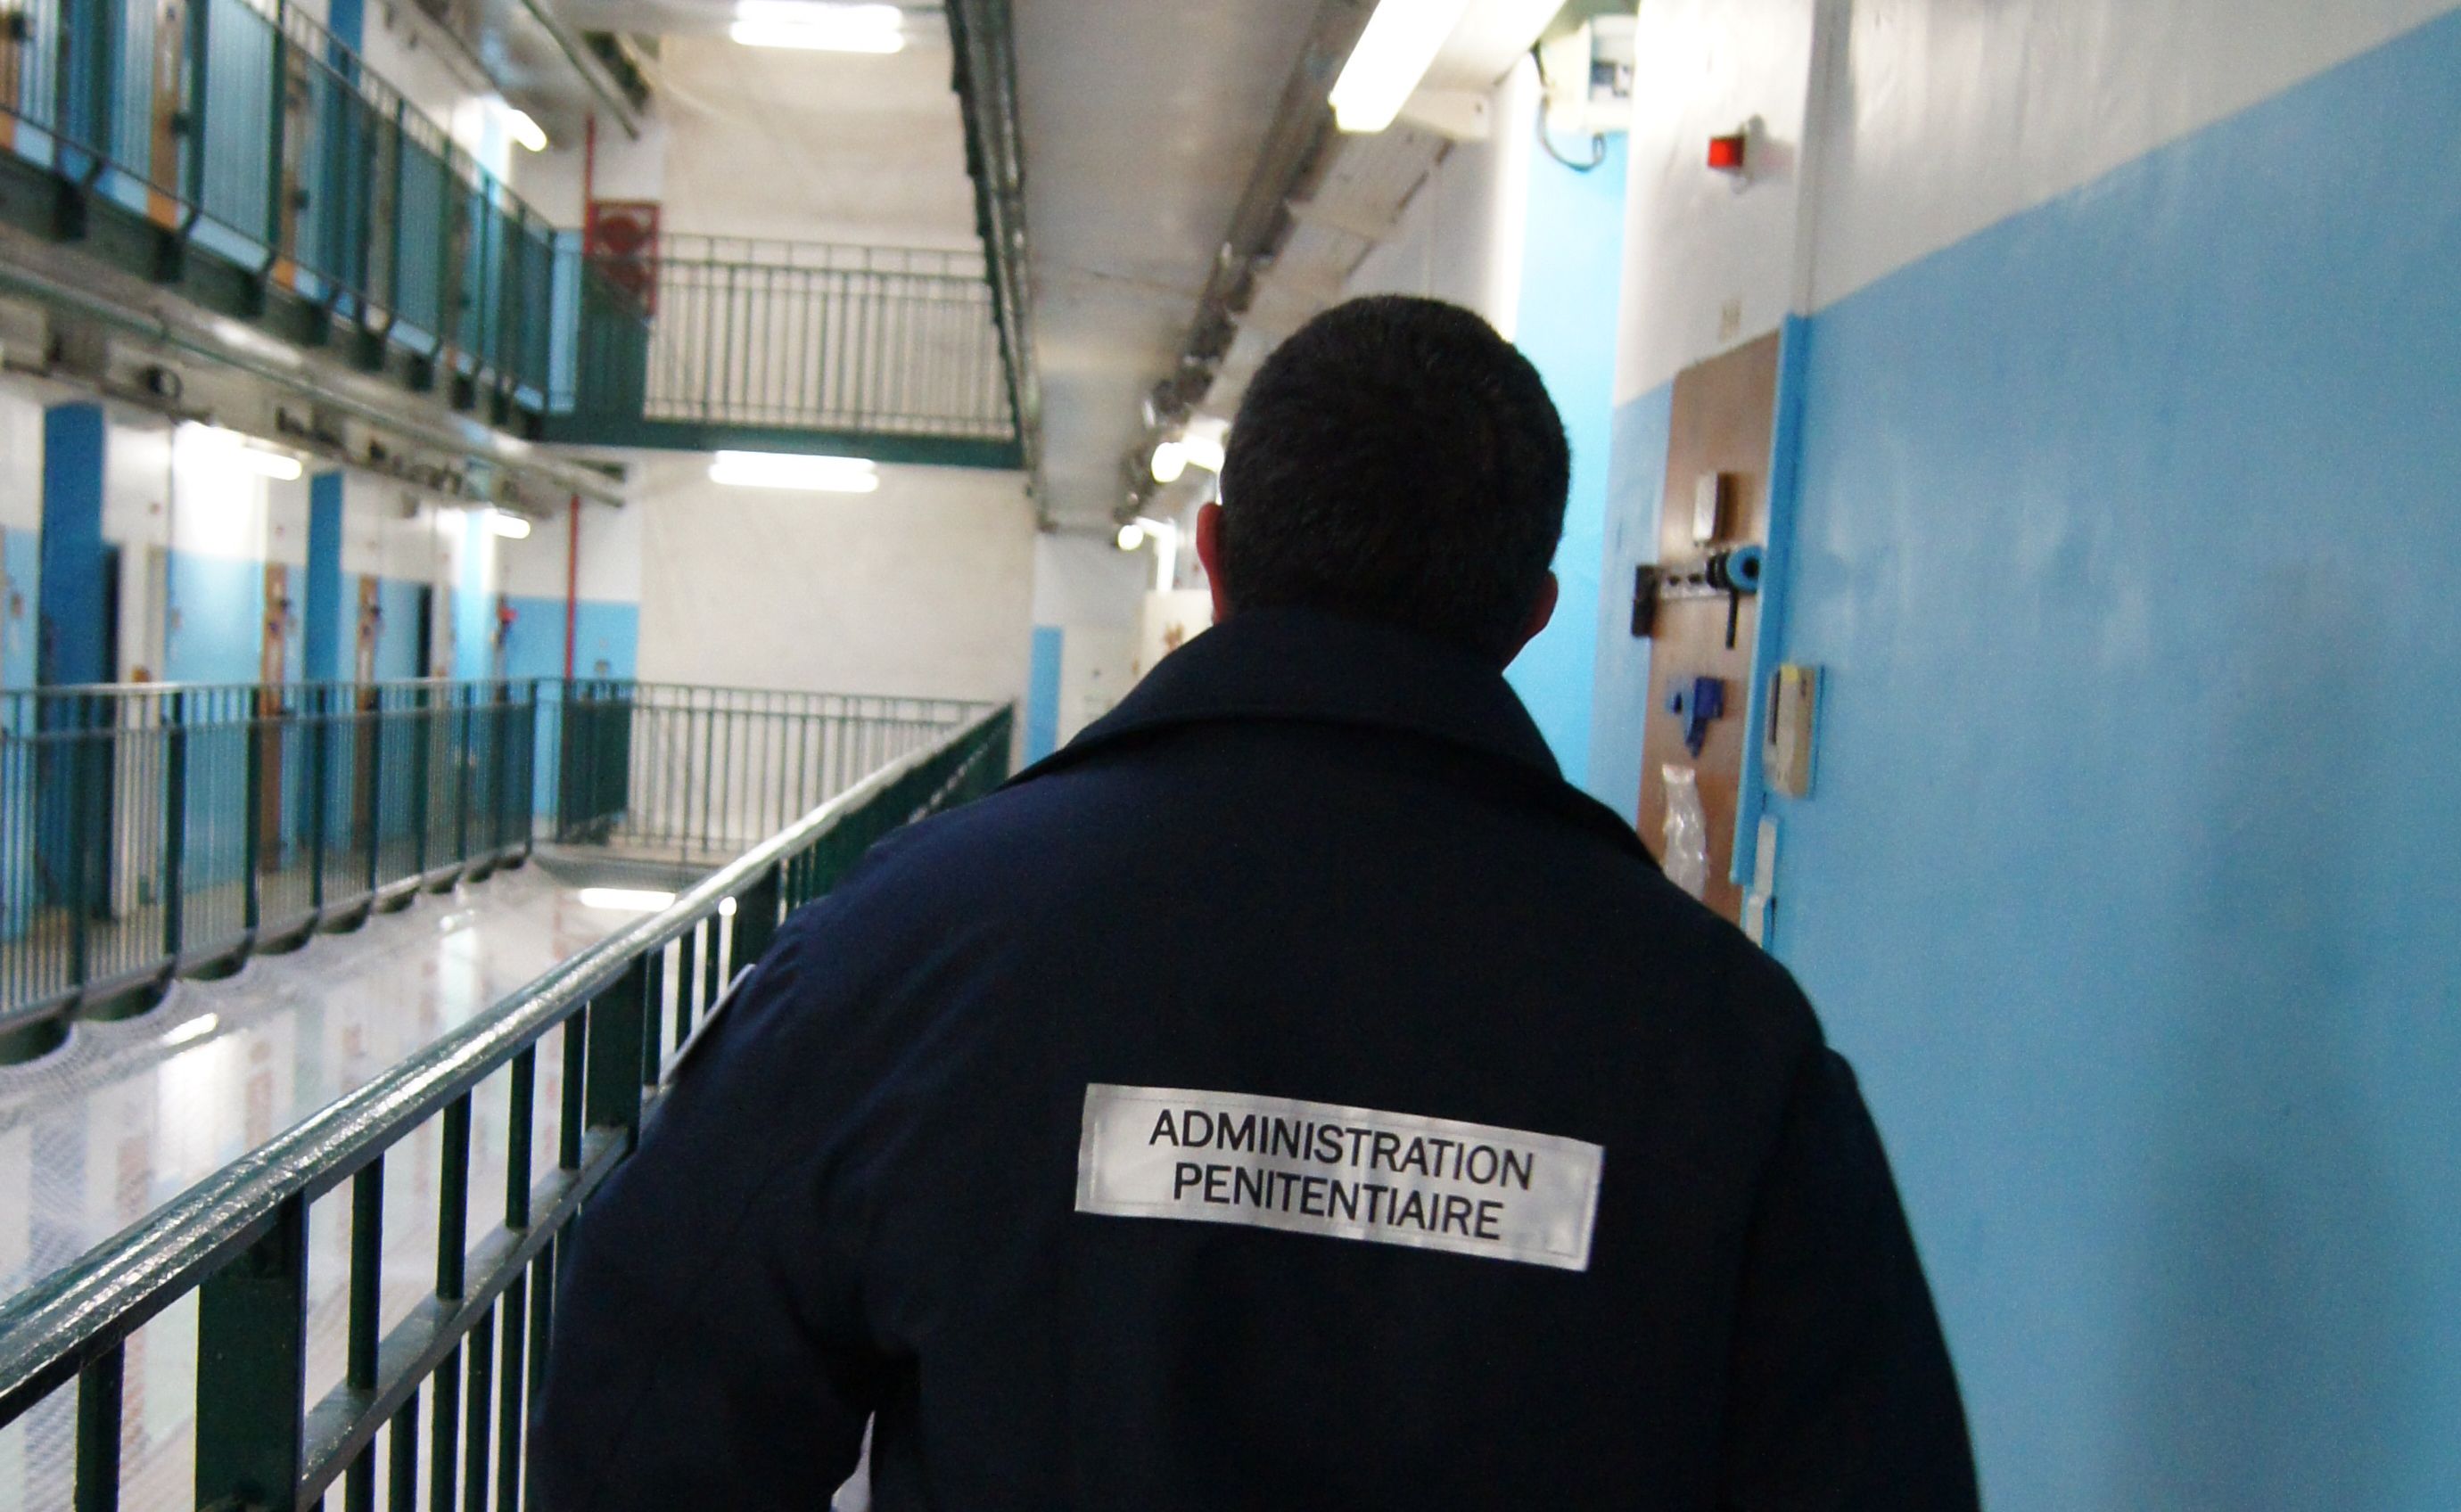 A warder patrolling a cell block at Fresnes, one of France’s biggest jails, during a visit I made earlier this month. Image by Christopher de Bellaigue. France, 2016.